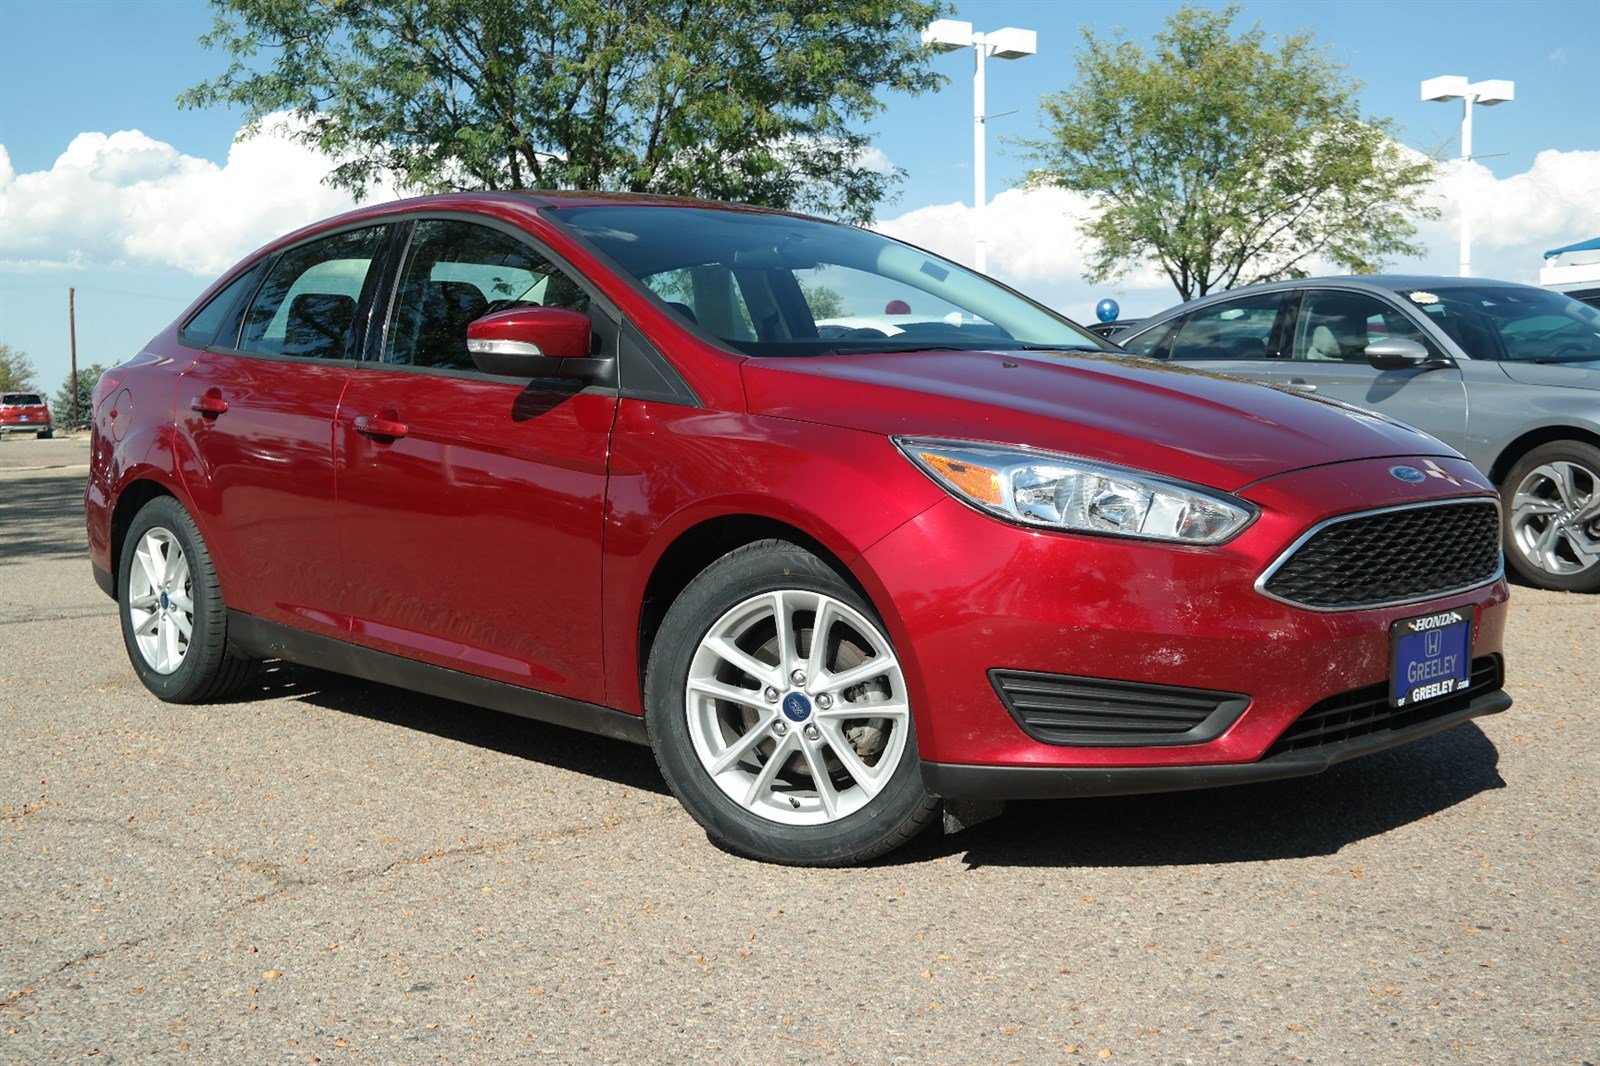 Pre-Owned 2015 Ford Focus SE 4dr Car in Greeley #A5512 | Honda of Greeley